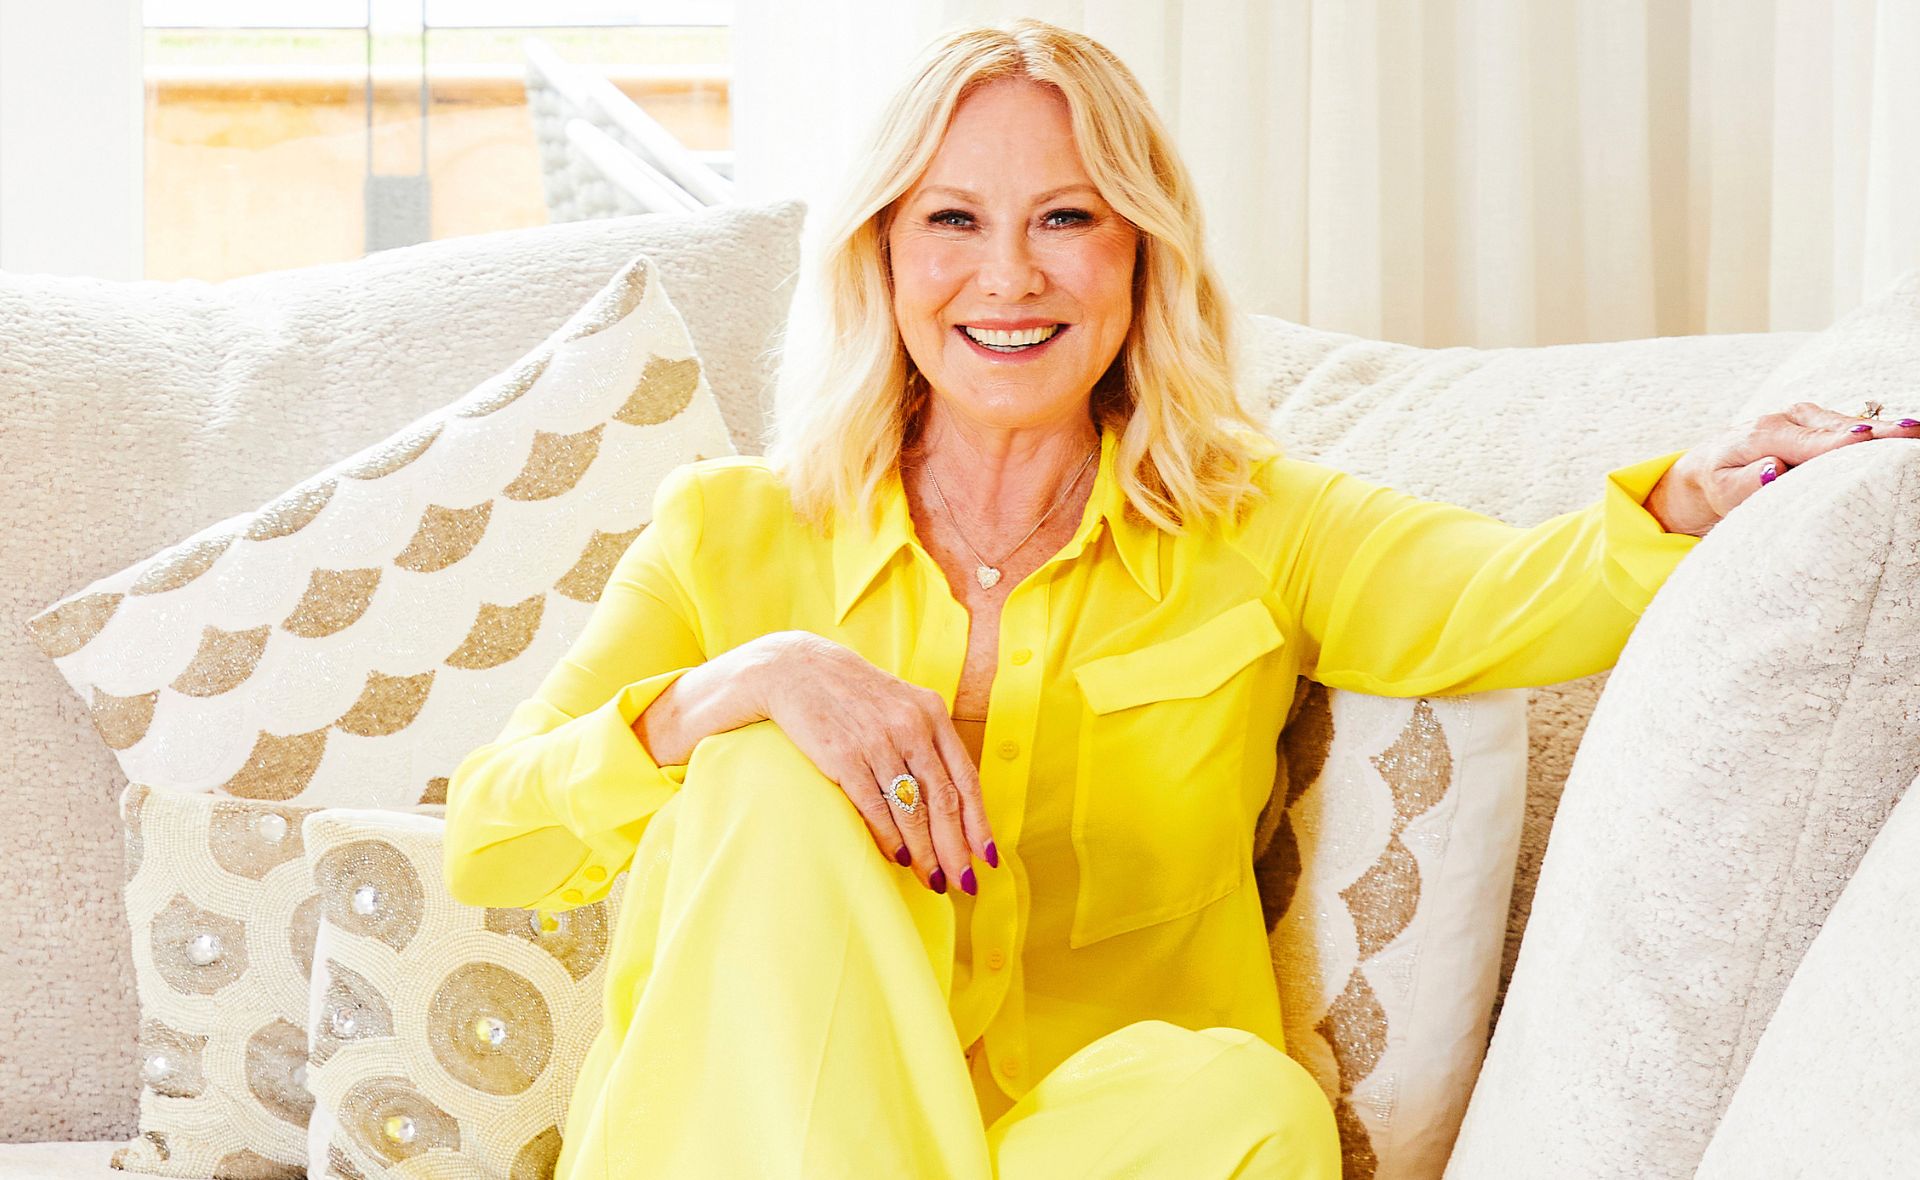 EXCLUSIVE: Kerri-Anne Kennerley reveals she “never intended on being controversial”